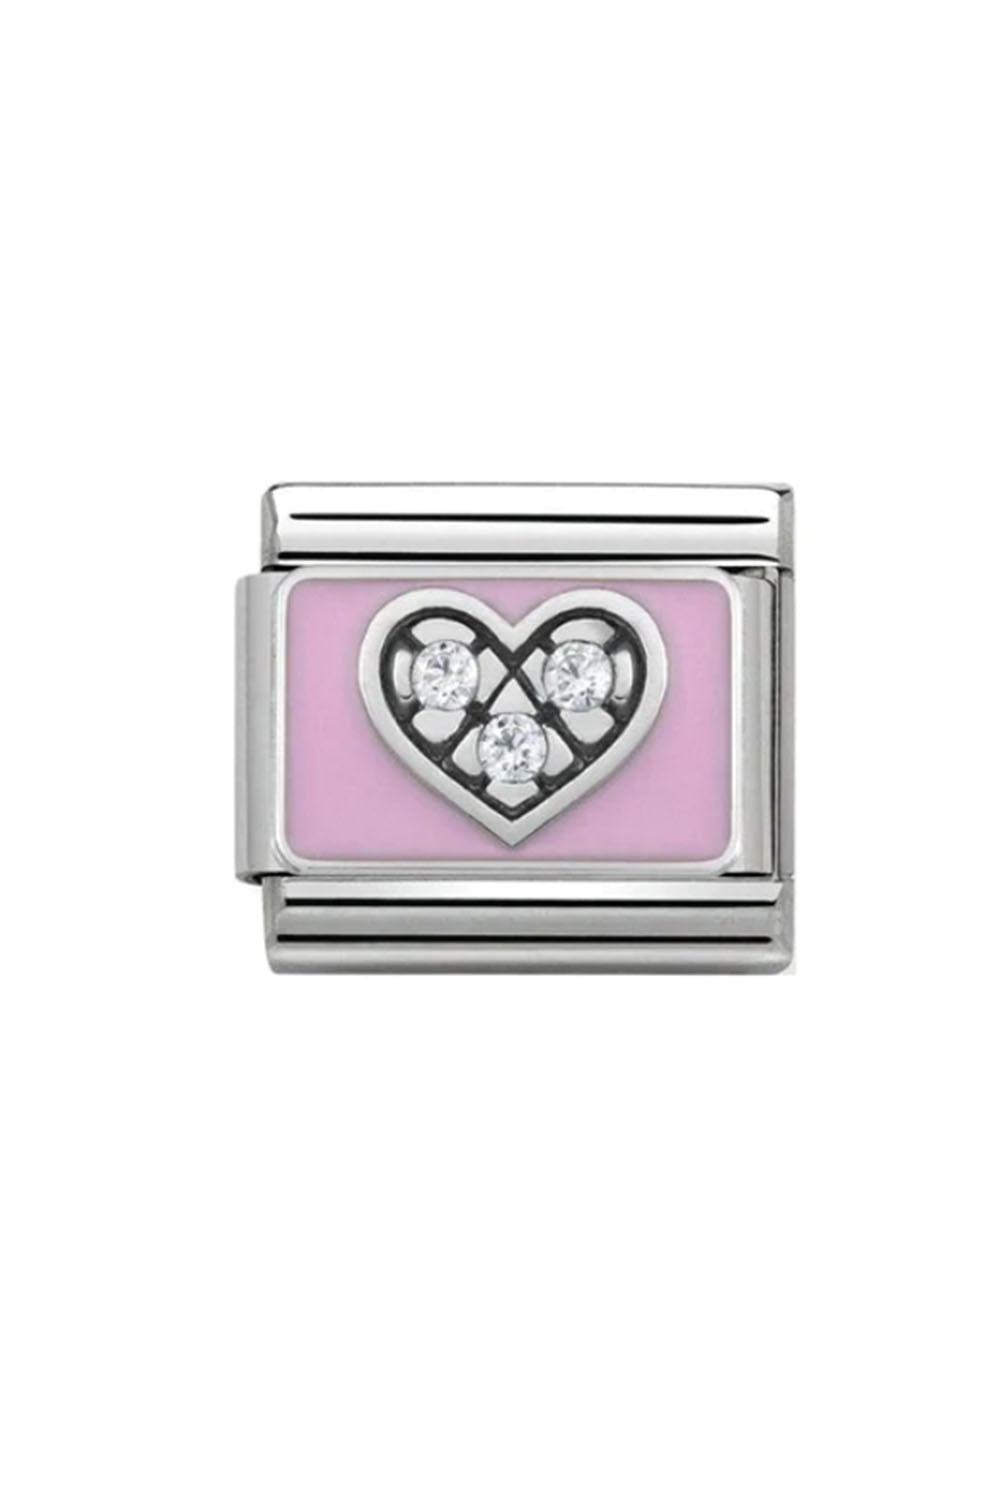 Symbols 925 Sterling Silver with enamel and CZ Heart pink